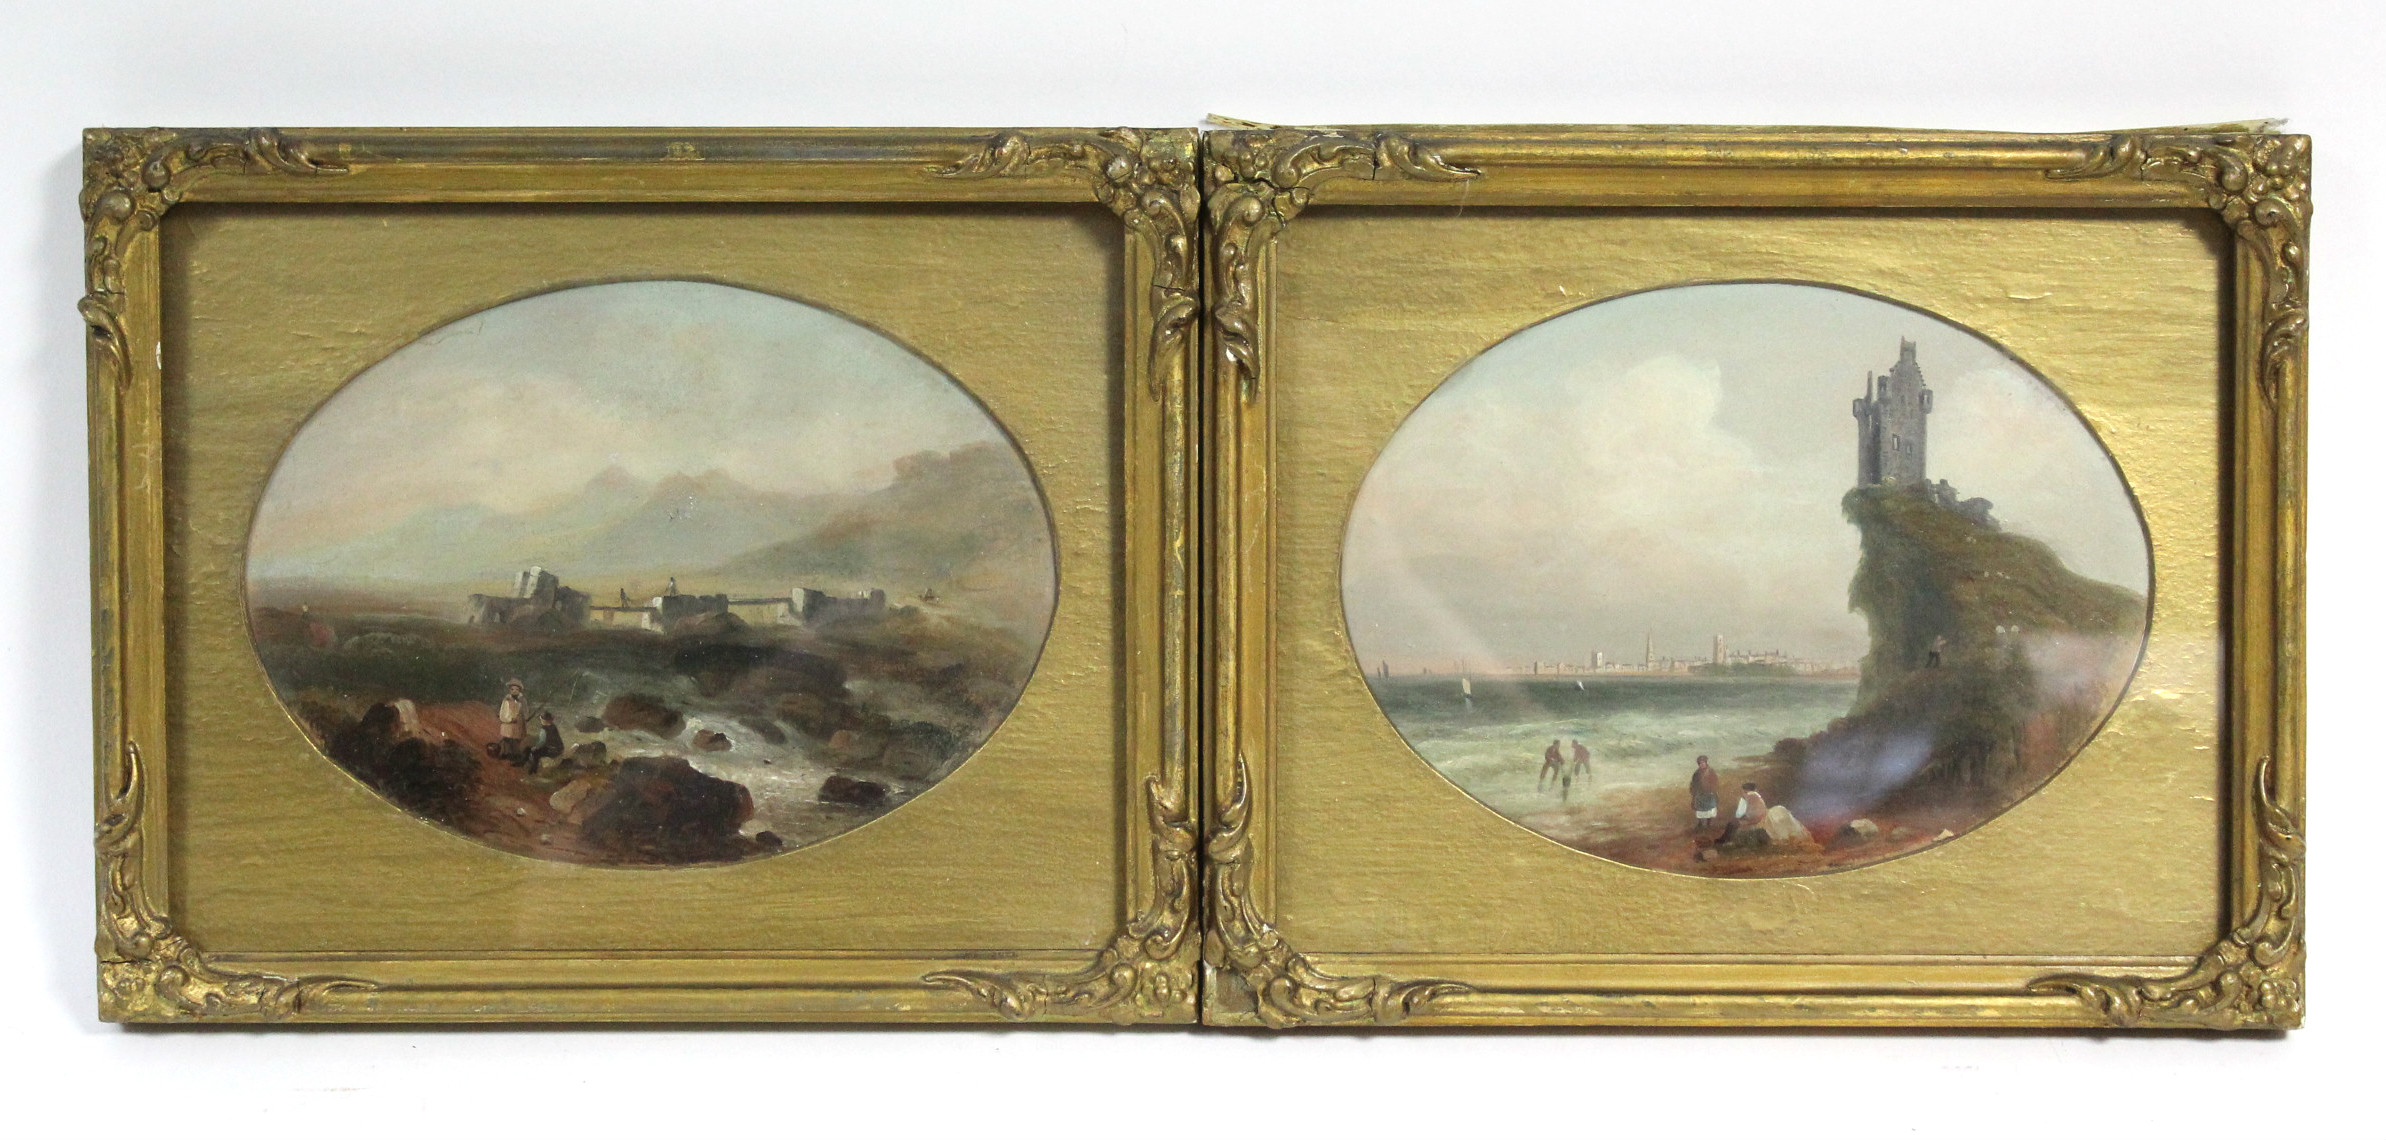 ENGLISH SCHOOL, mid-19th century. A coastal scene with cliff-top castle, figures on the beach, a